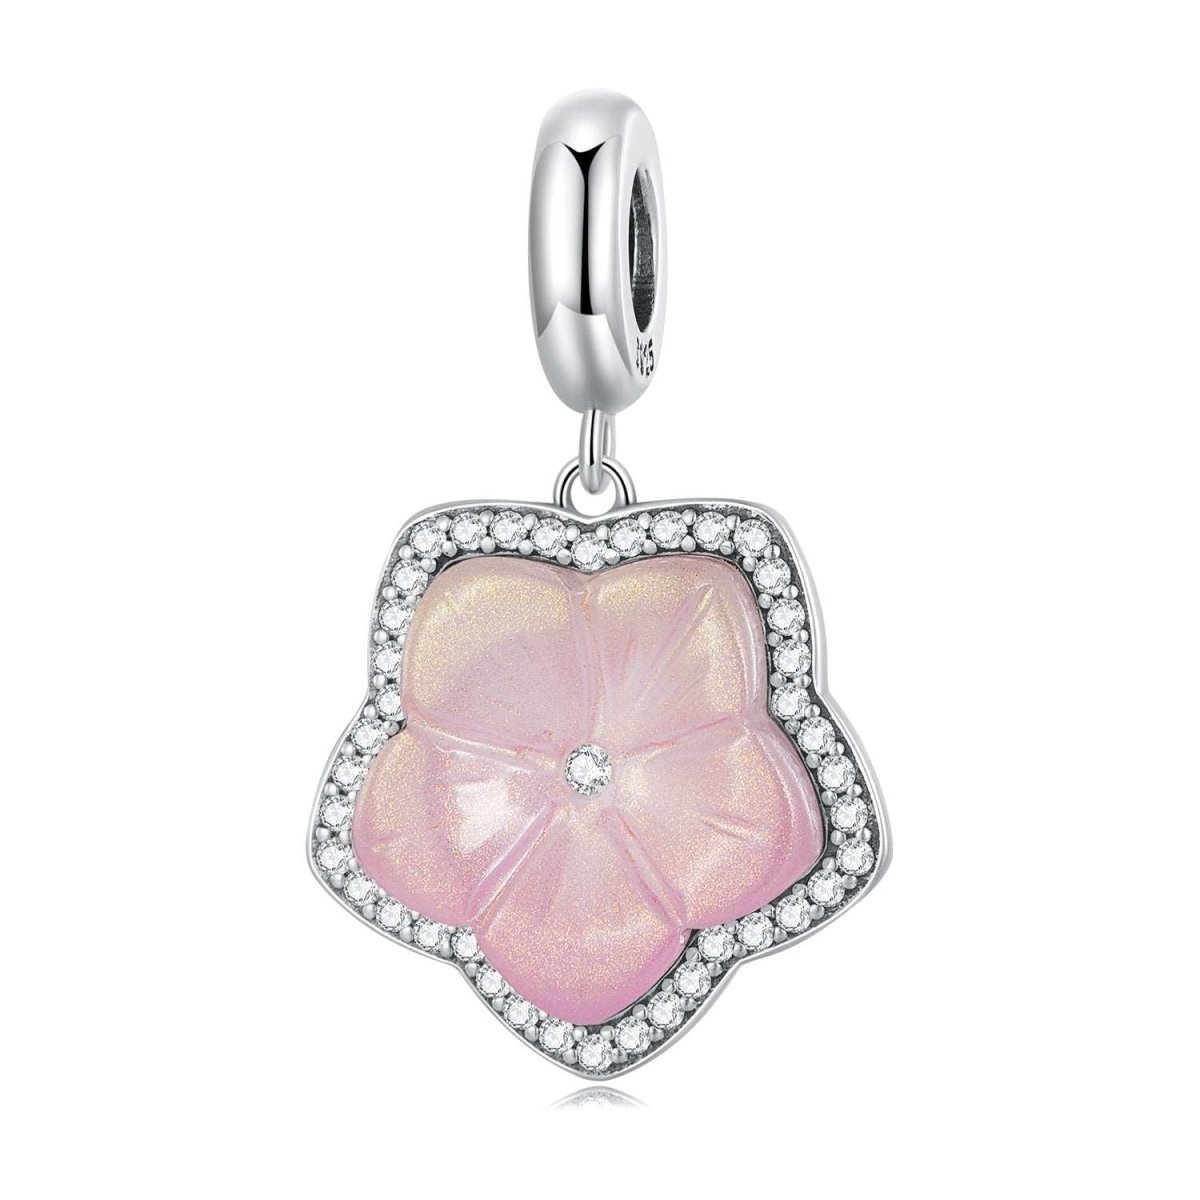 Cherry Blossom Charm - Uniquely You Online - Charms